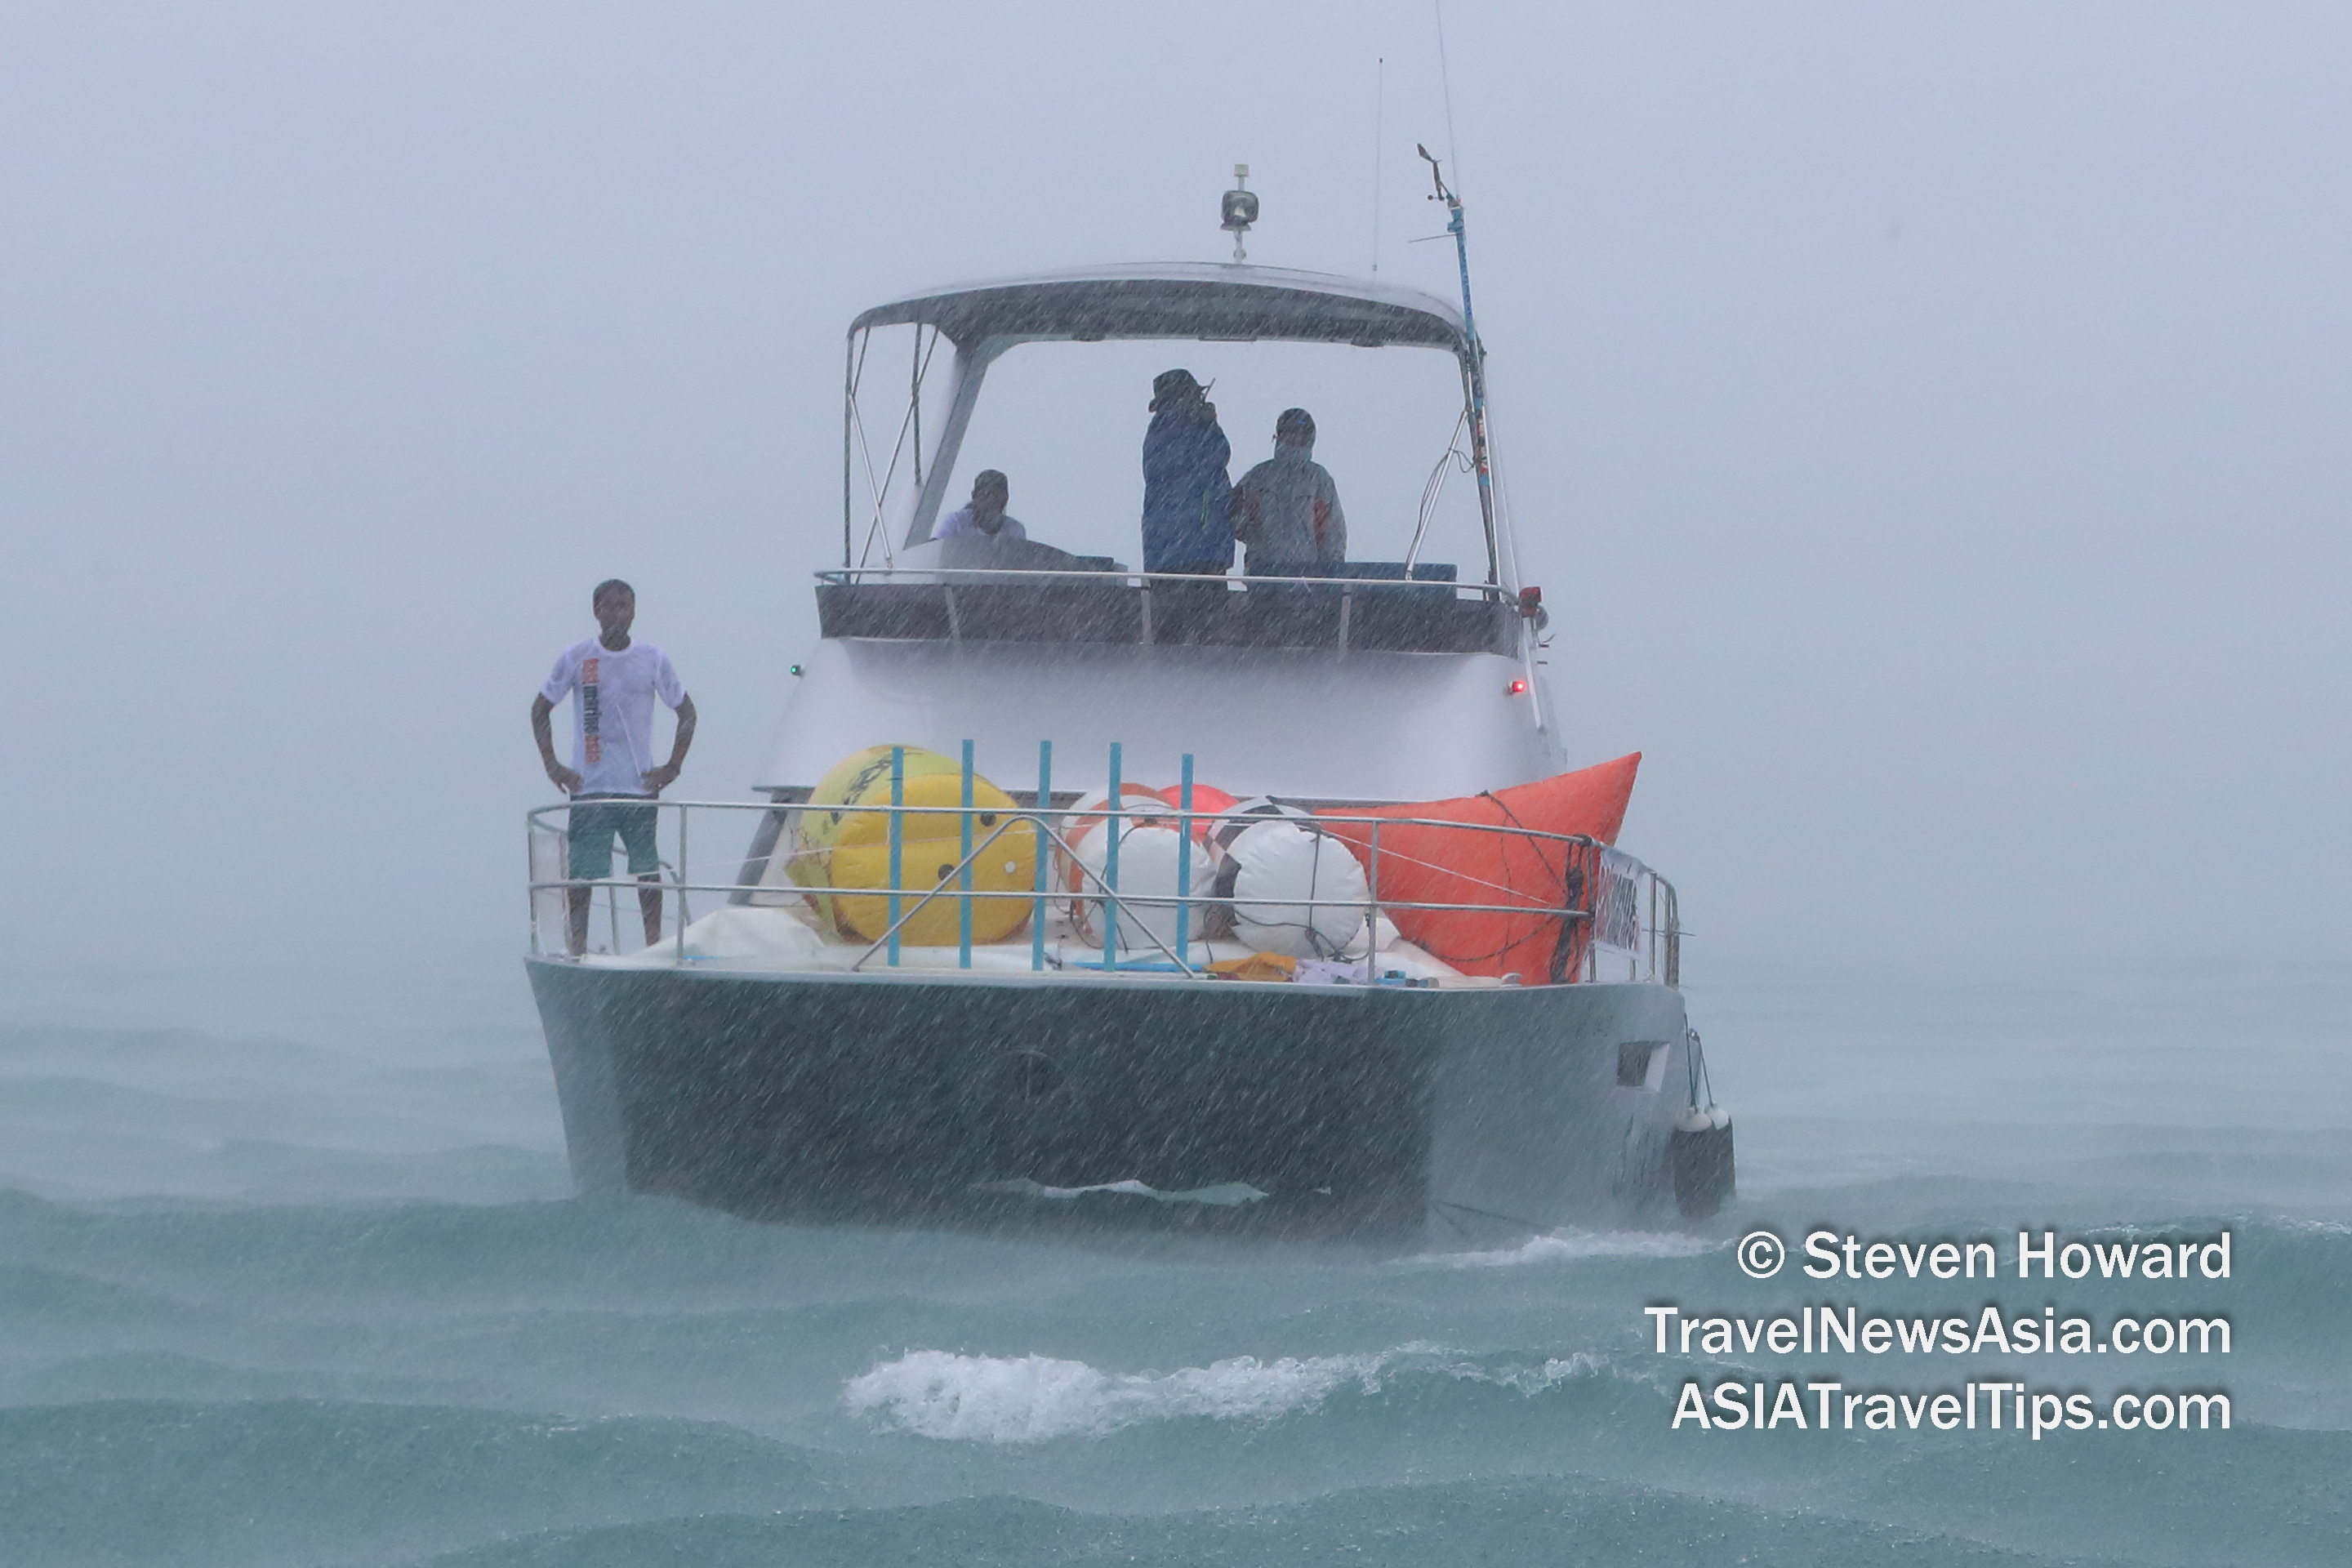 Thunder storms, torrential rain, lightning and very poor visibility meant that there was no racing on Day 1 of the Cape Panwa Hotel Phuket Raceweek 2019. Picture by Steven Howard of TravelNewsAsia.com Click to enlarge.